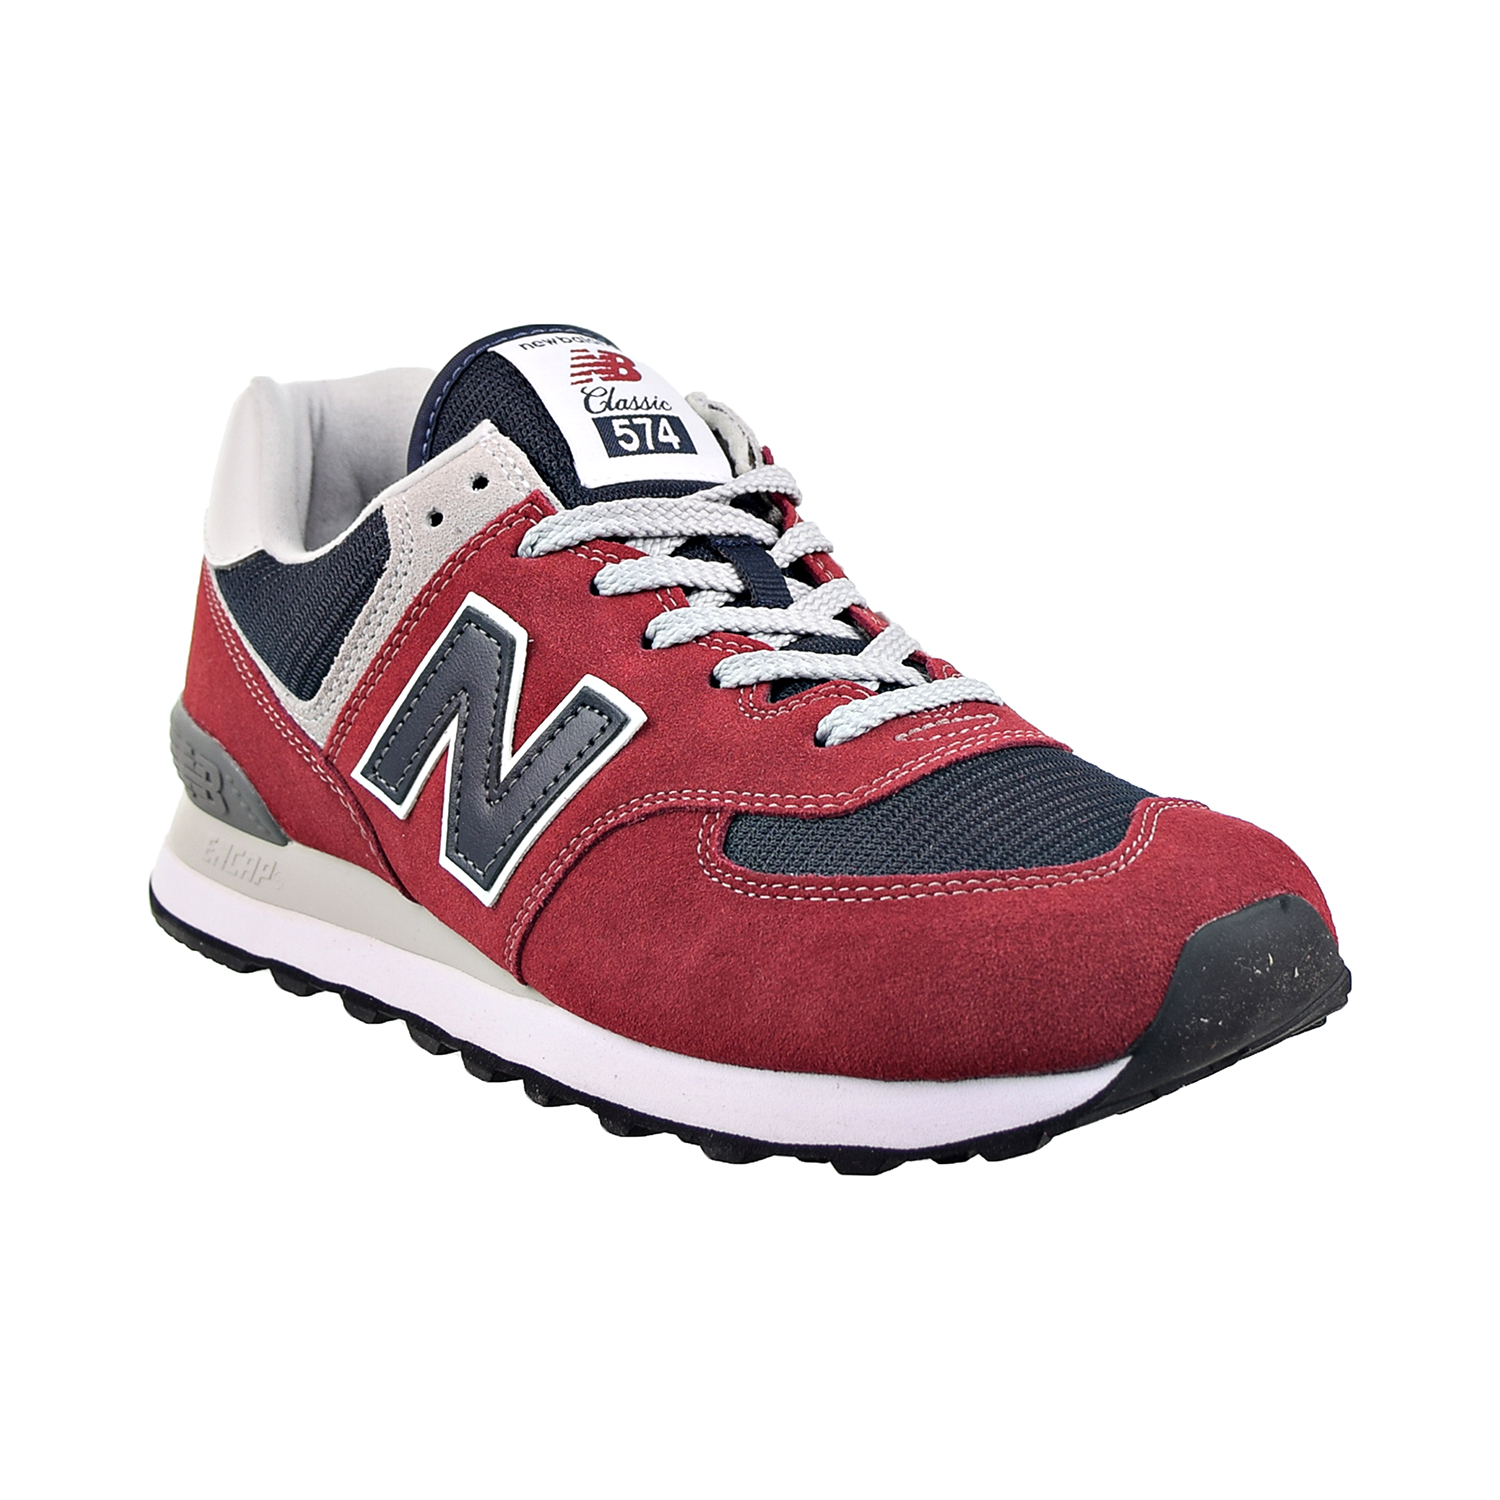 New Balance 574 Men's Shoes Red ml574-eh2